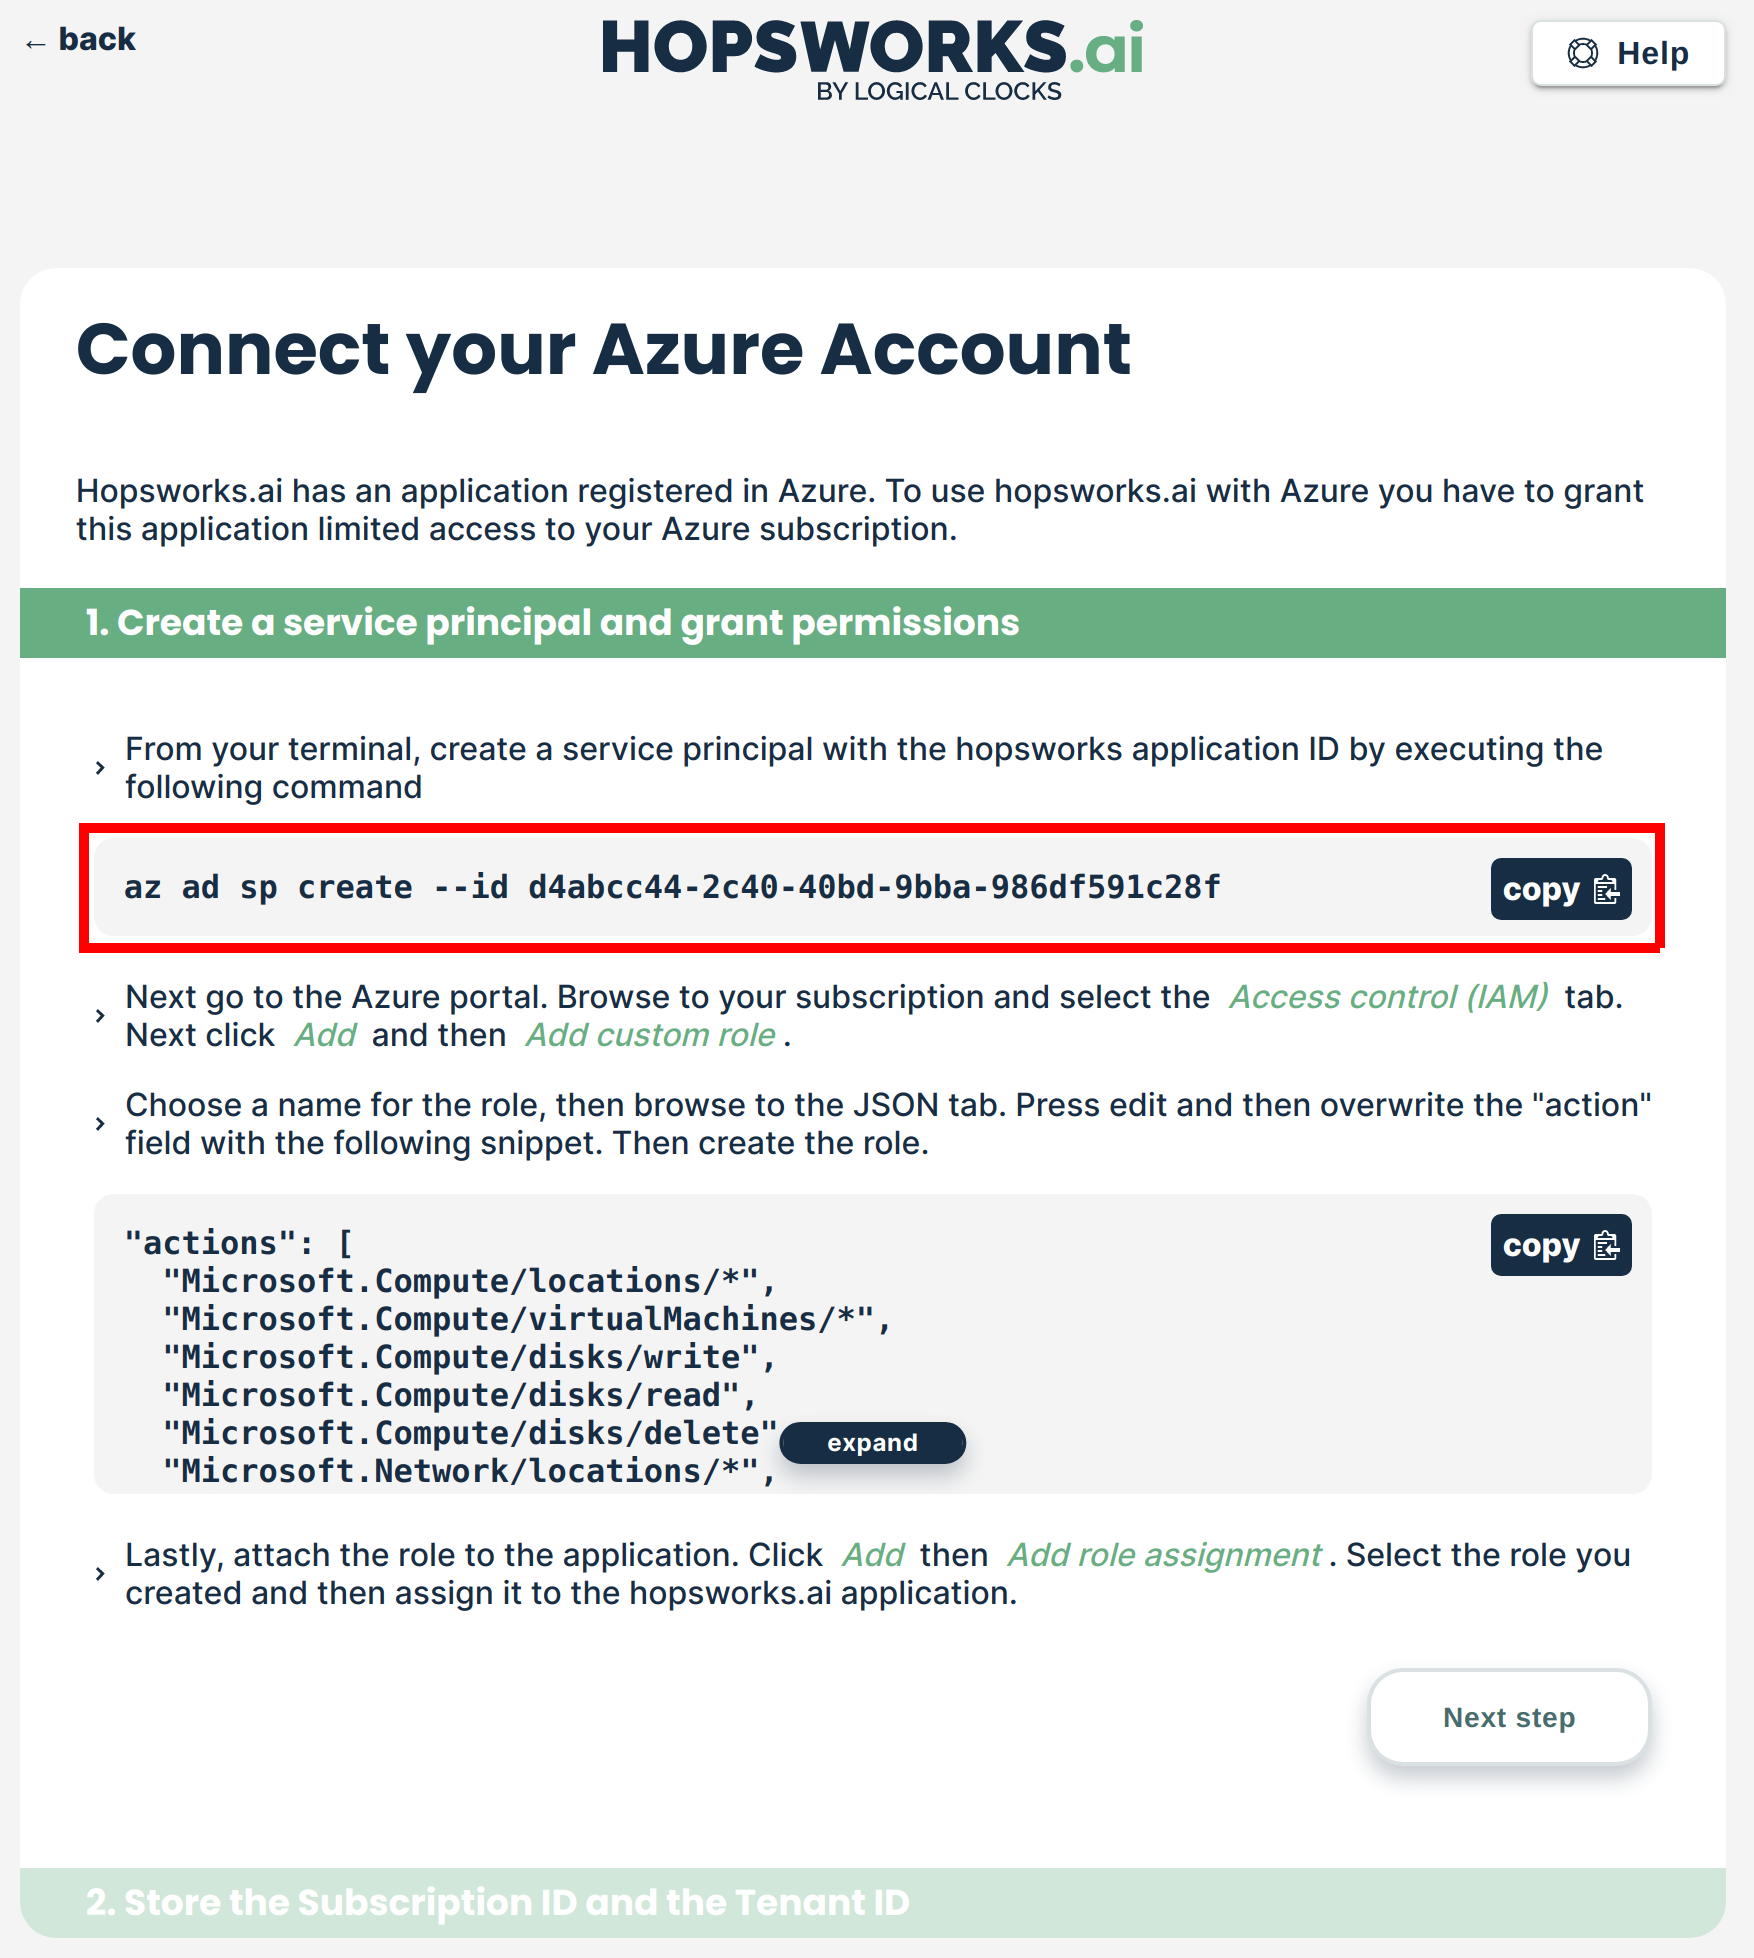 Connect your Azure Account